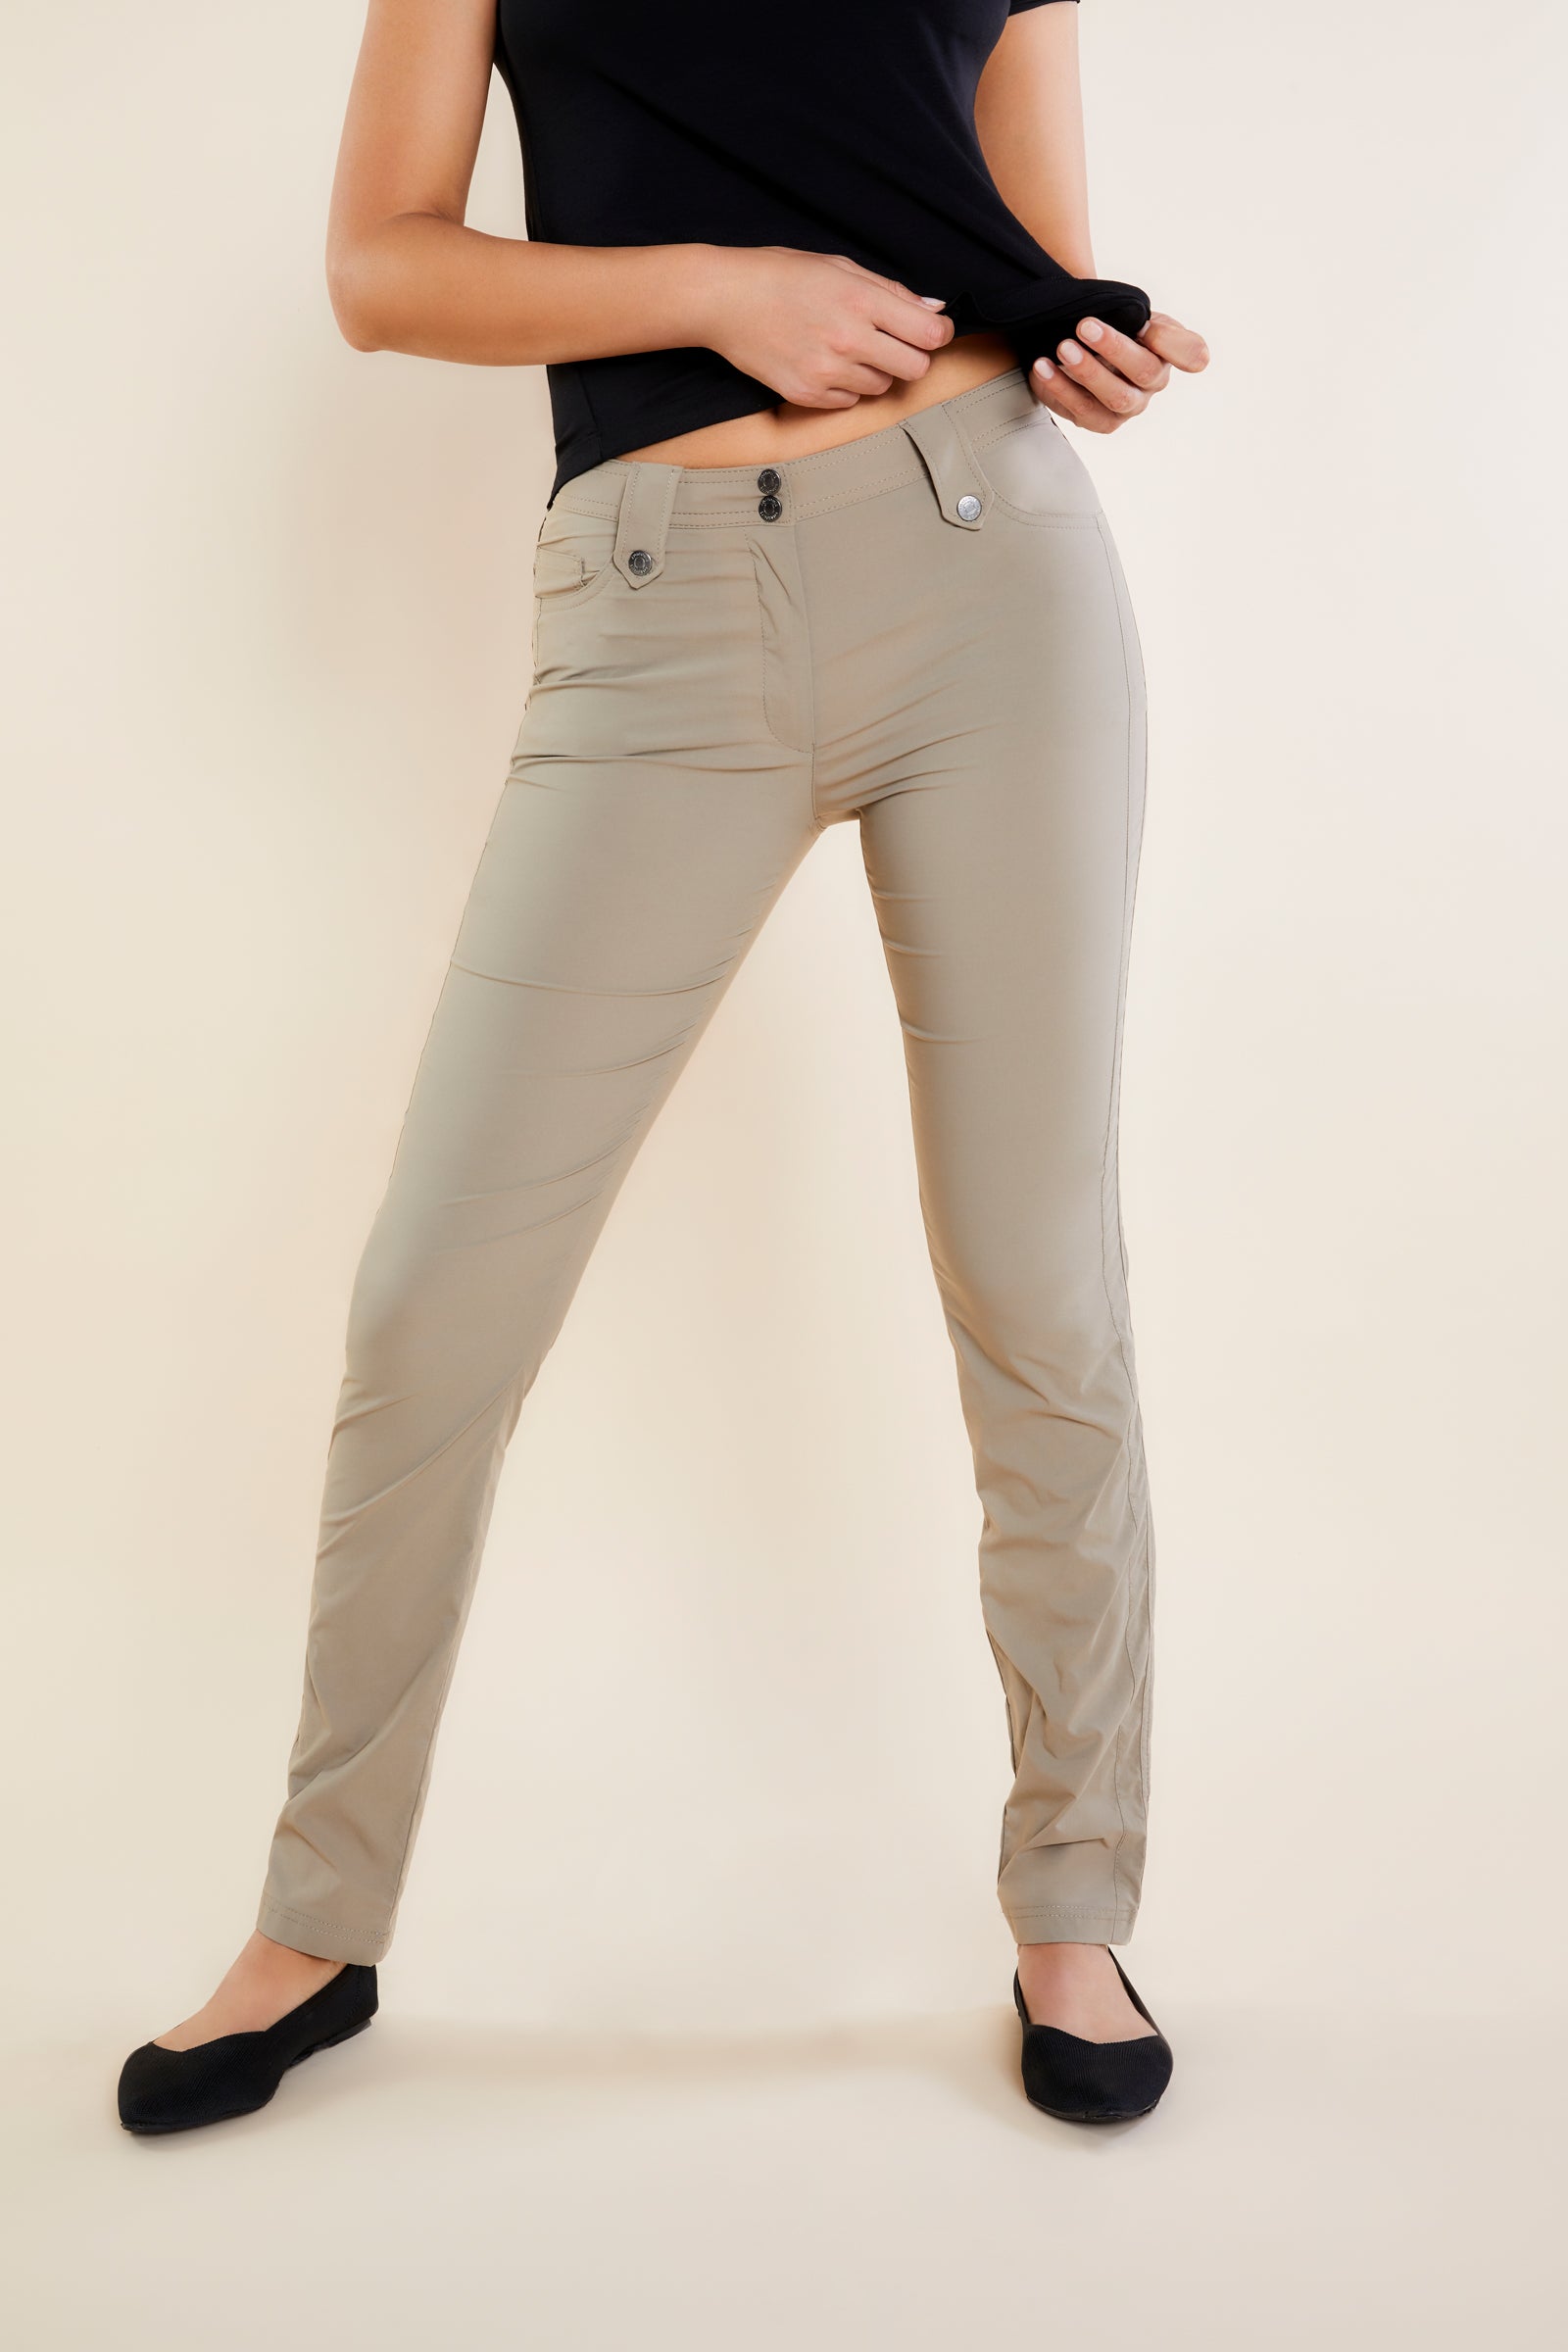 Women's Slim-Sation® Classic Pants, Straight Legs Tummy Control Panel - and  TravelSmith Travel Solutions and Gear